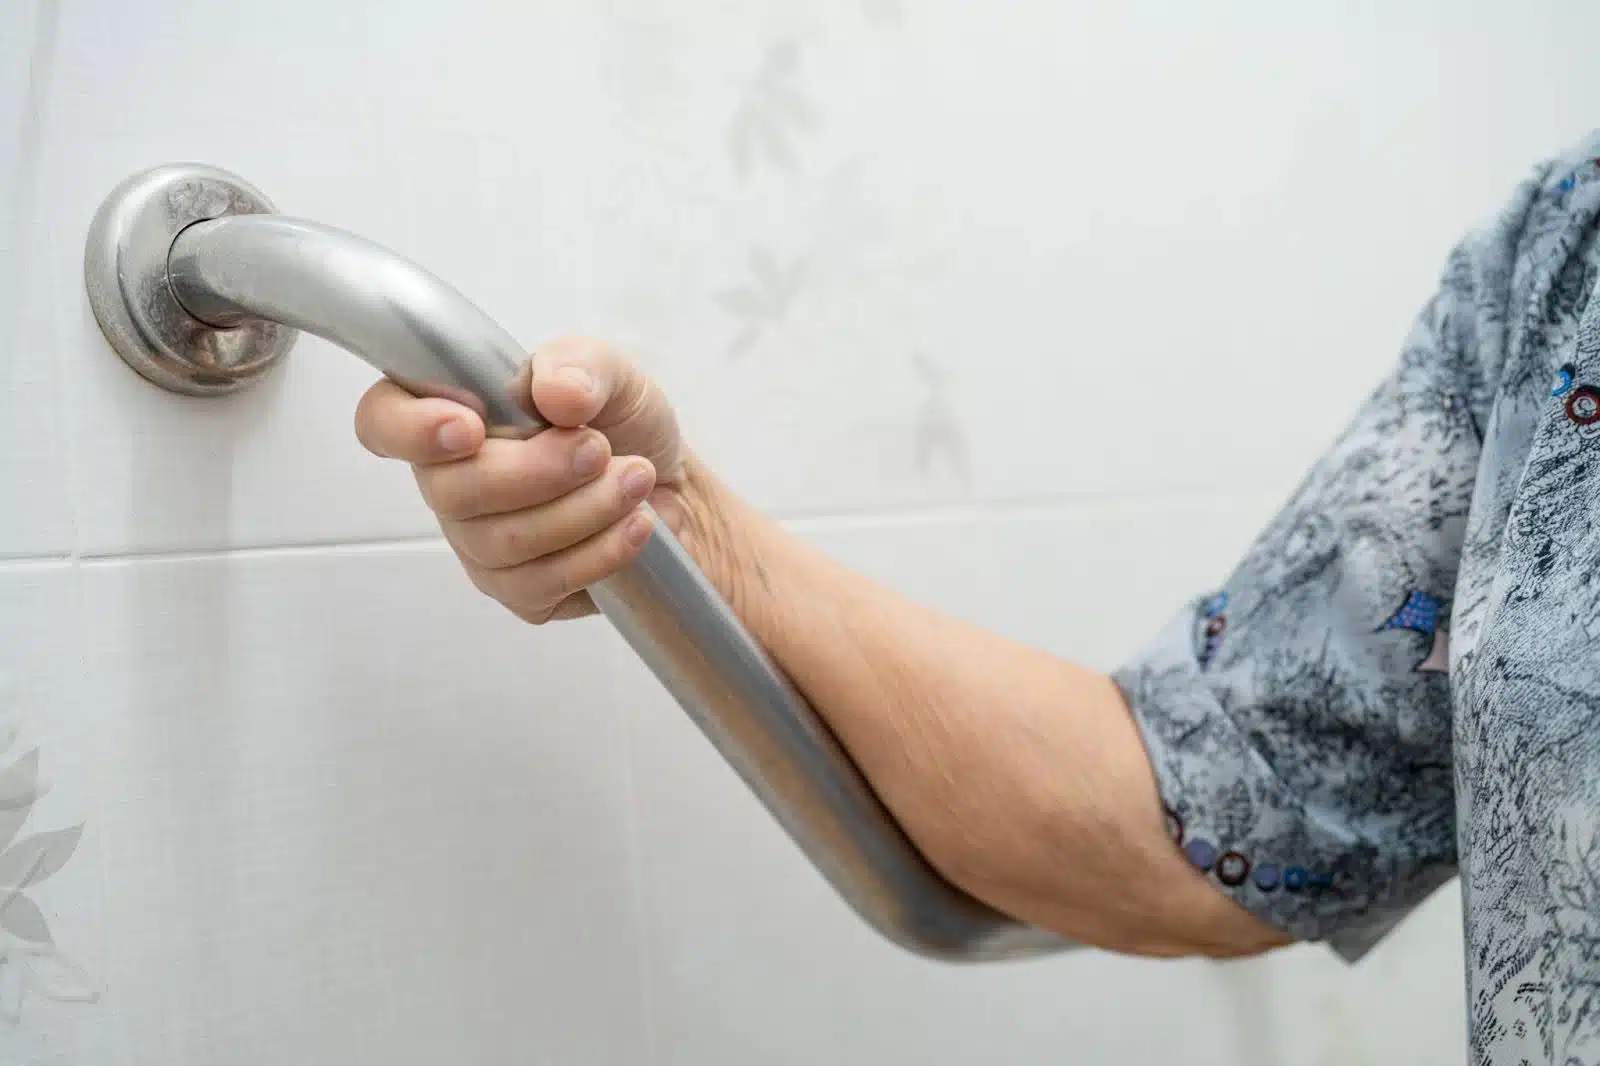 A grab bar in a bathroom to help with aging in place.